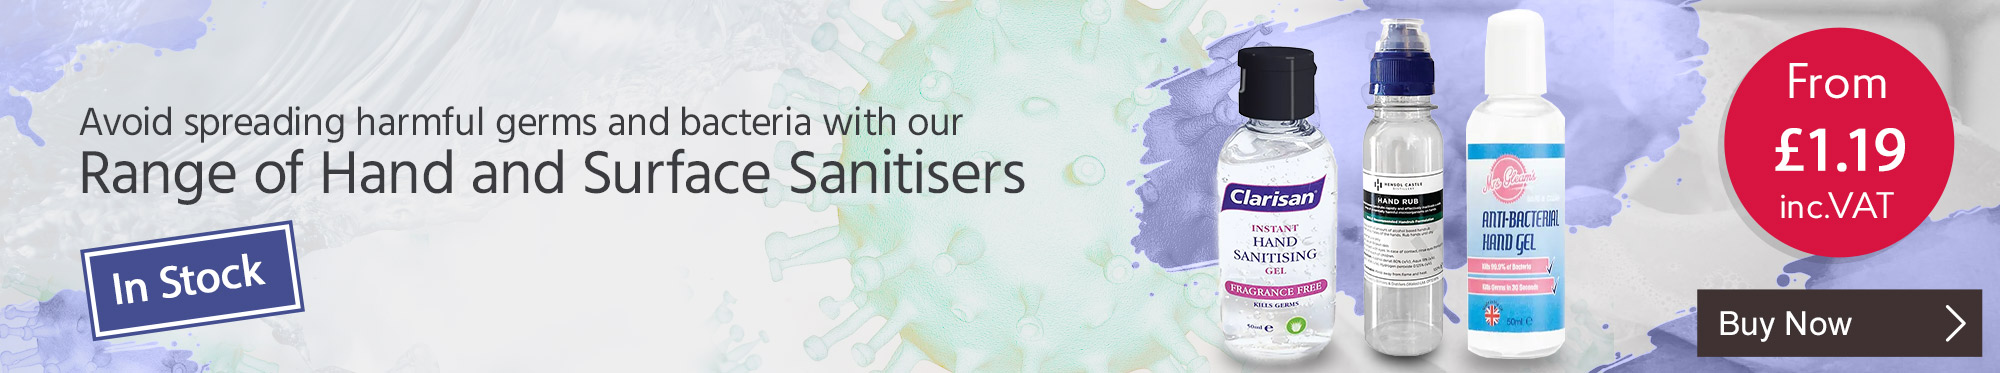 Avoid Spreading Harmful Germs and Bacteria with The Range of Hand and Surface Sanitisers